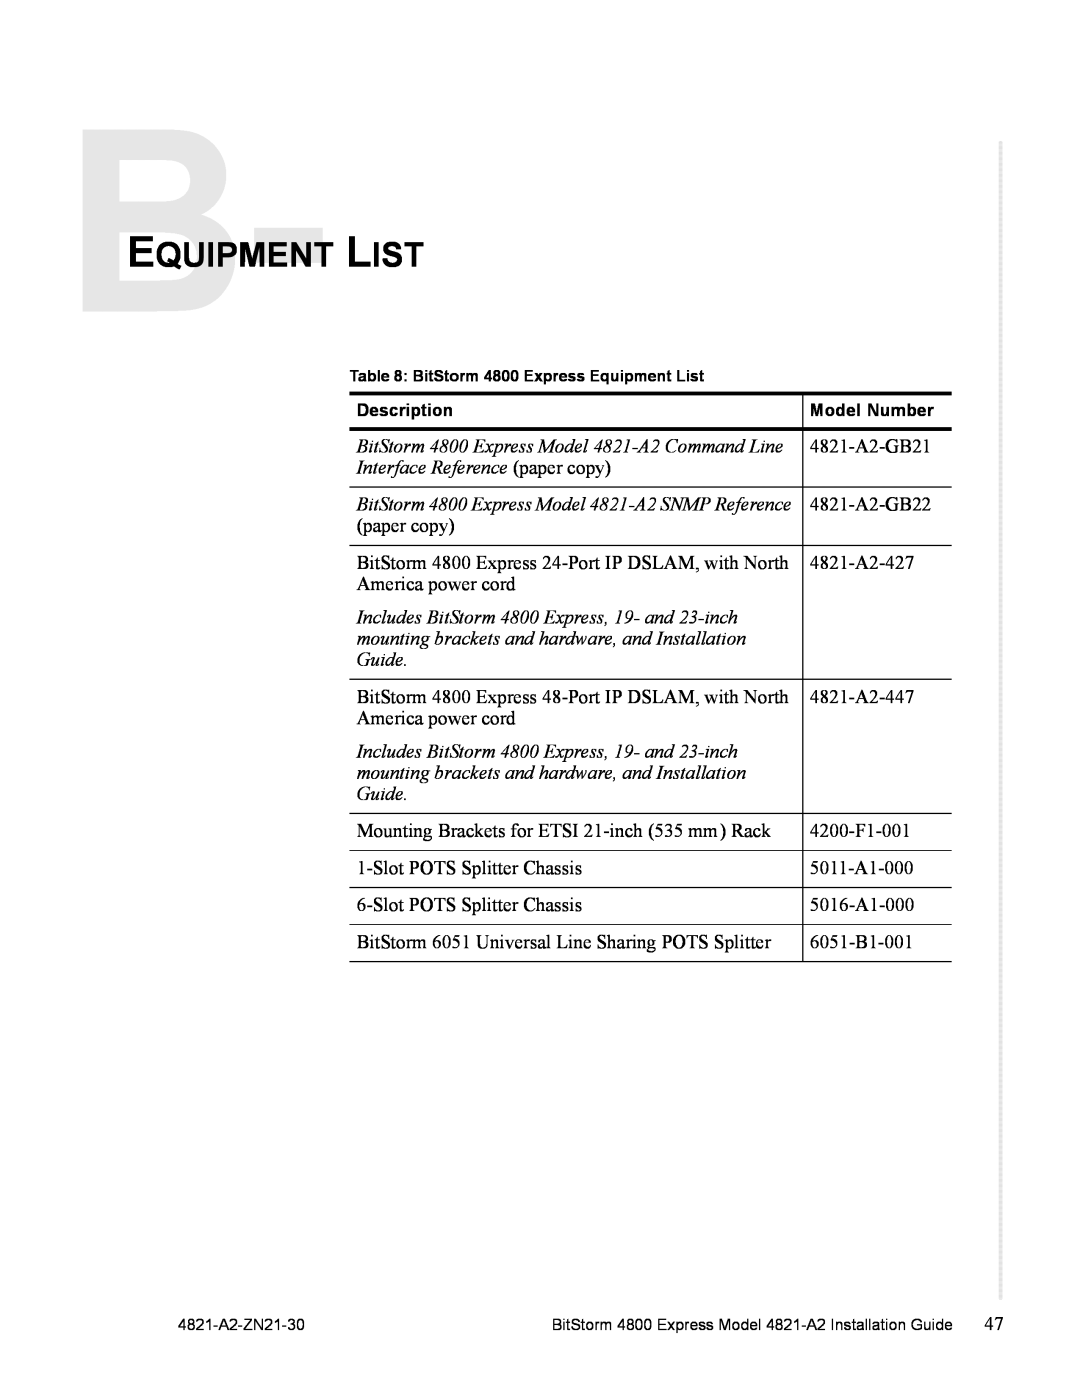 Zhone Technologies 4821-A2 Equipment List, Interface Reference paper copy, Includes BitStorm 4800 Express, 19- and 23-inch 